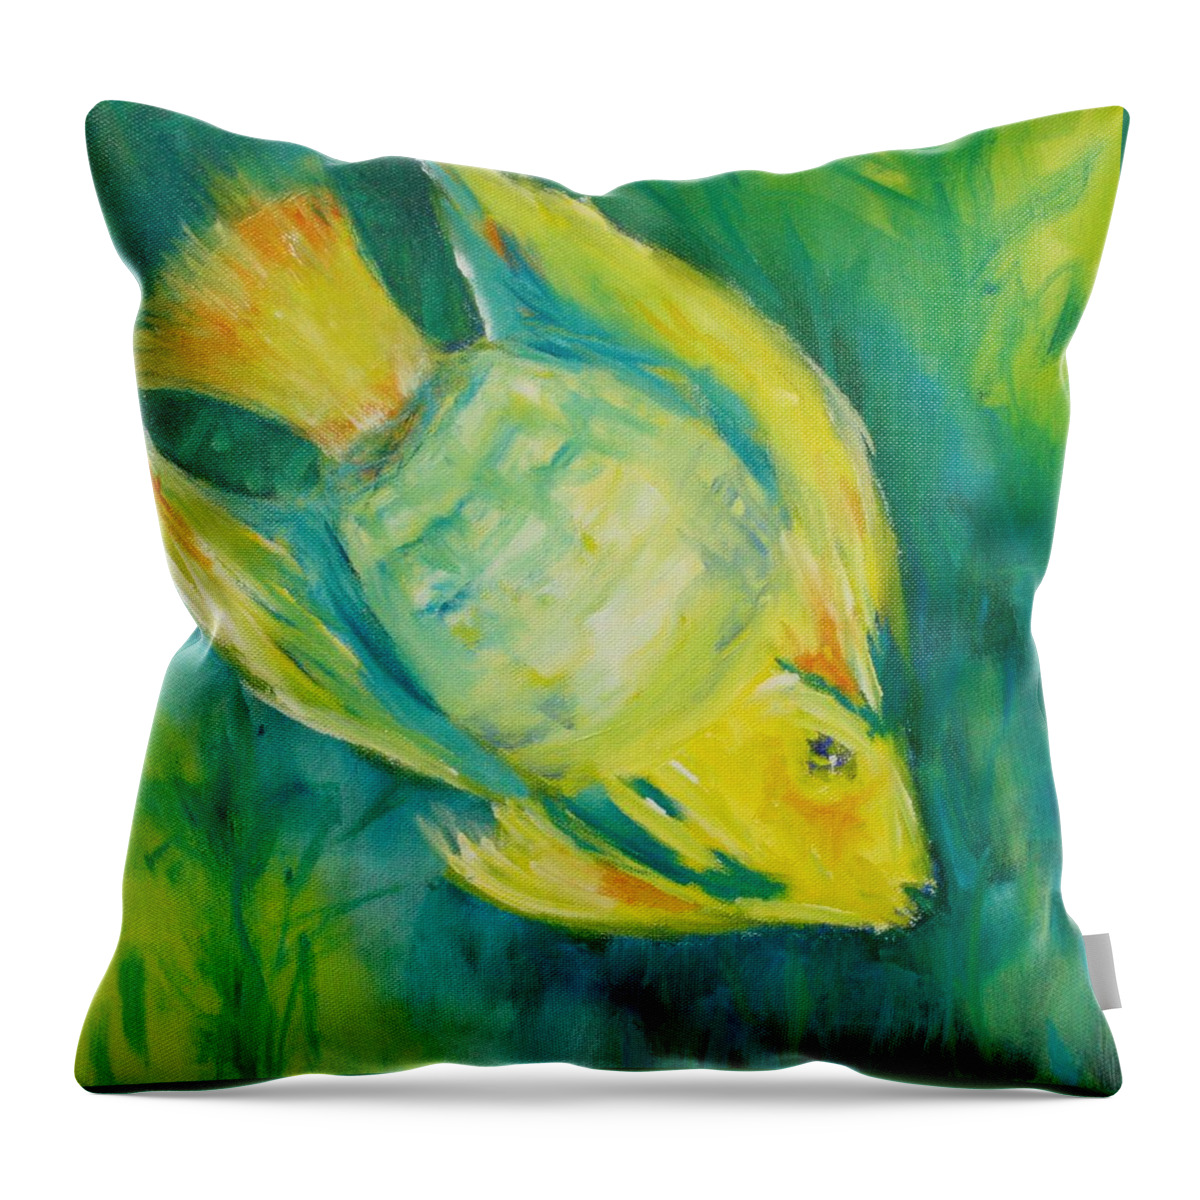 Fish Throw Pillow featuring the painting Yellow Fish by Tara Moorman